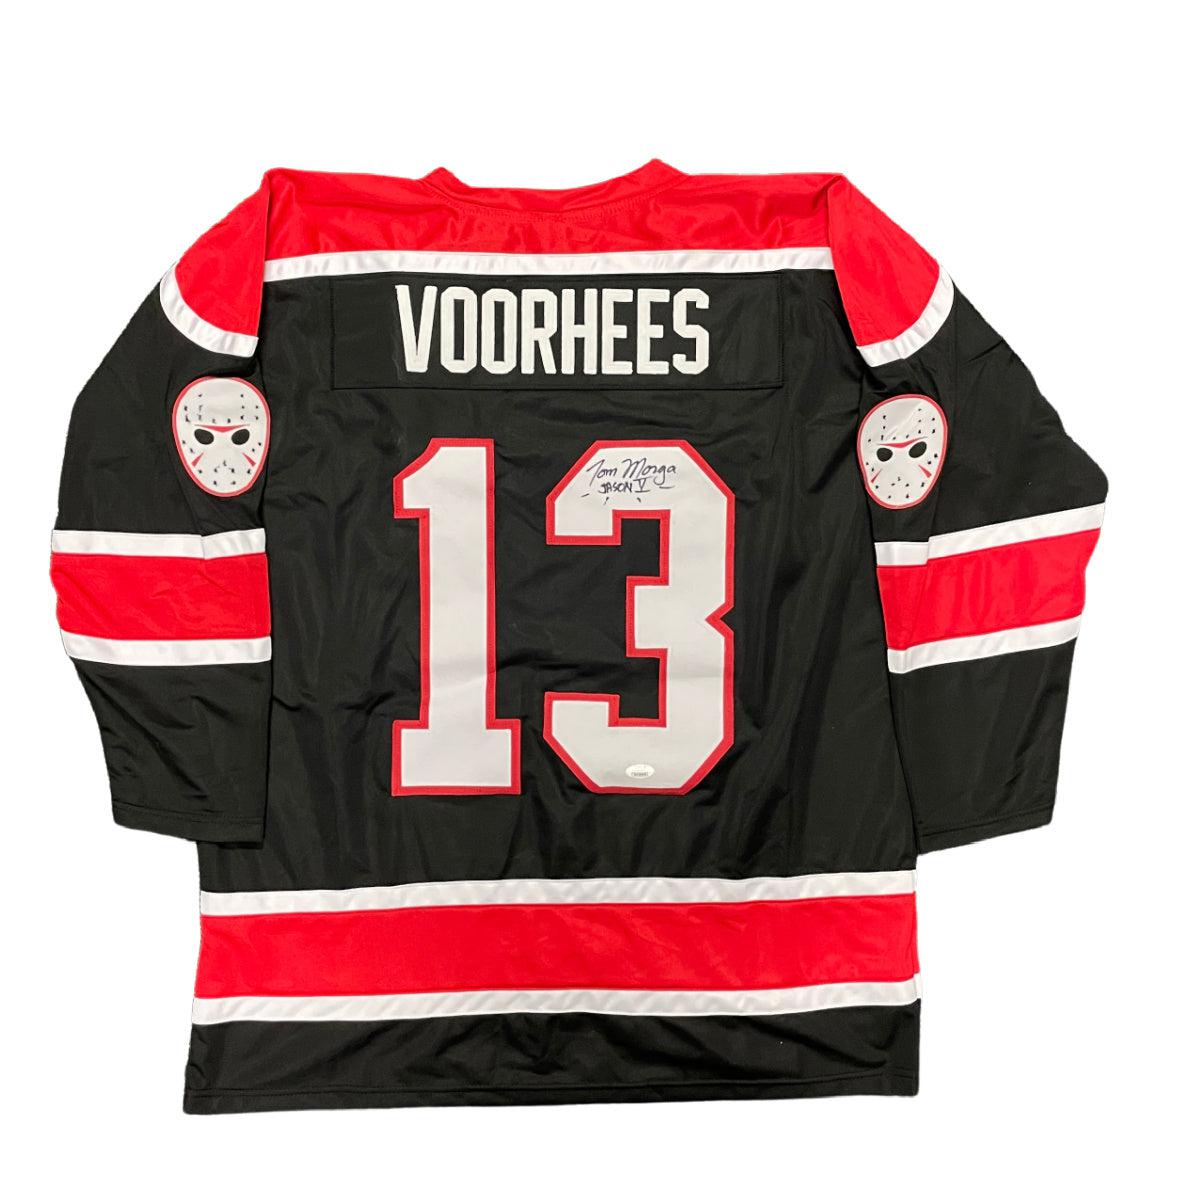 Tom Morga Signed Custom Jason Voorhees Jersey Xl Friday The 13th Jsa C Zobie Productions